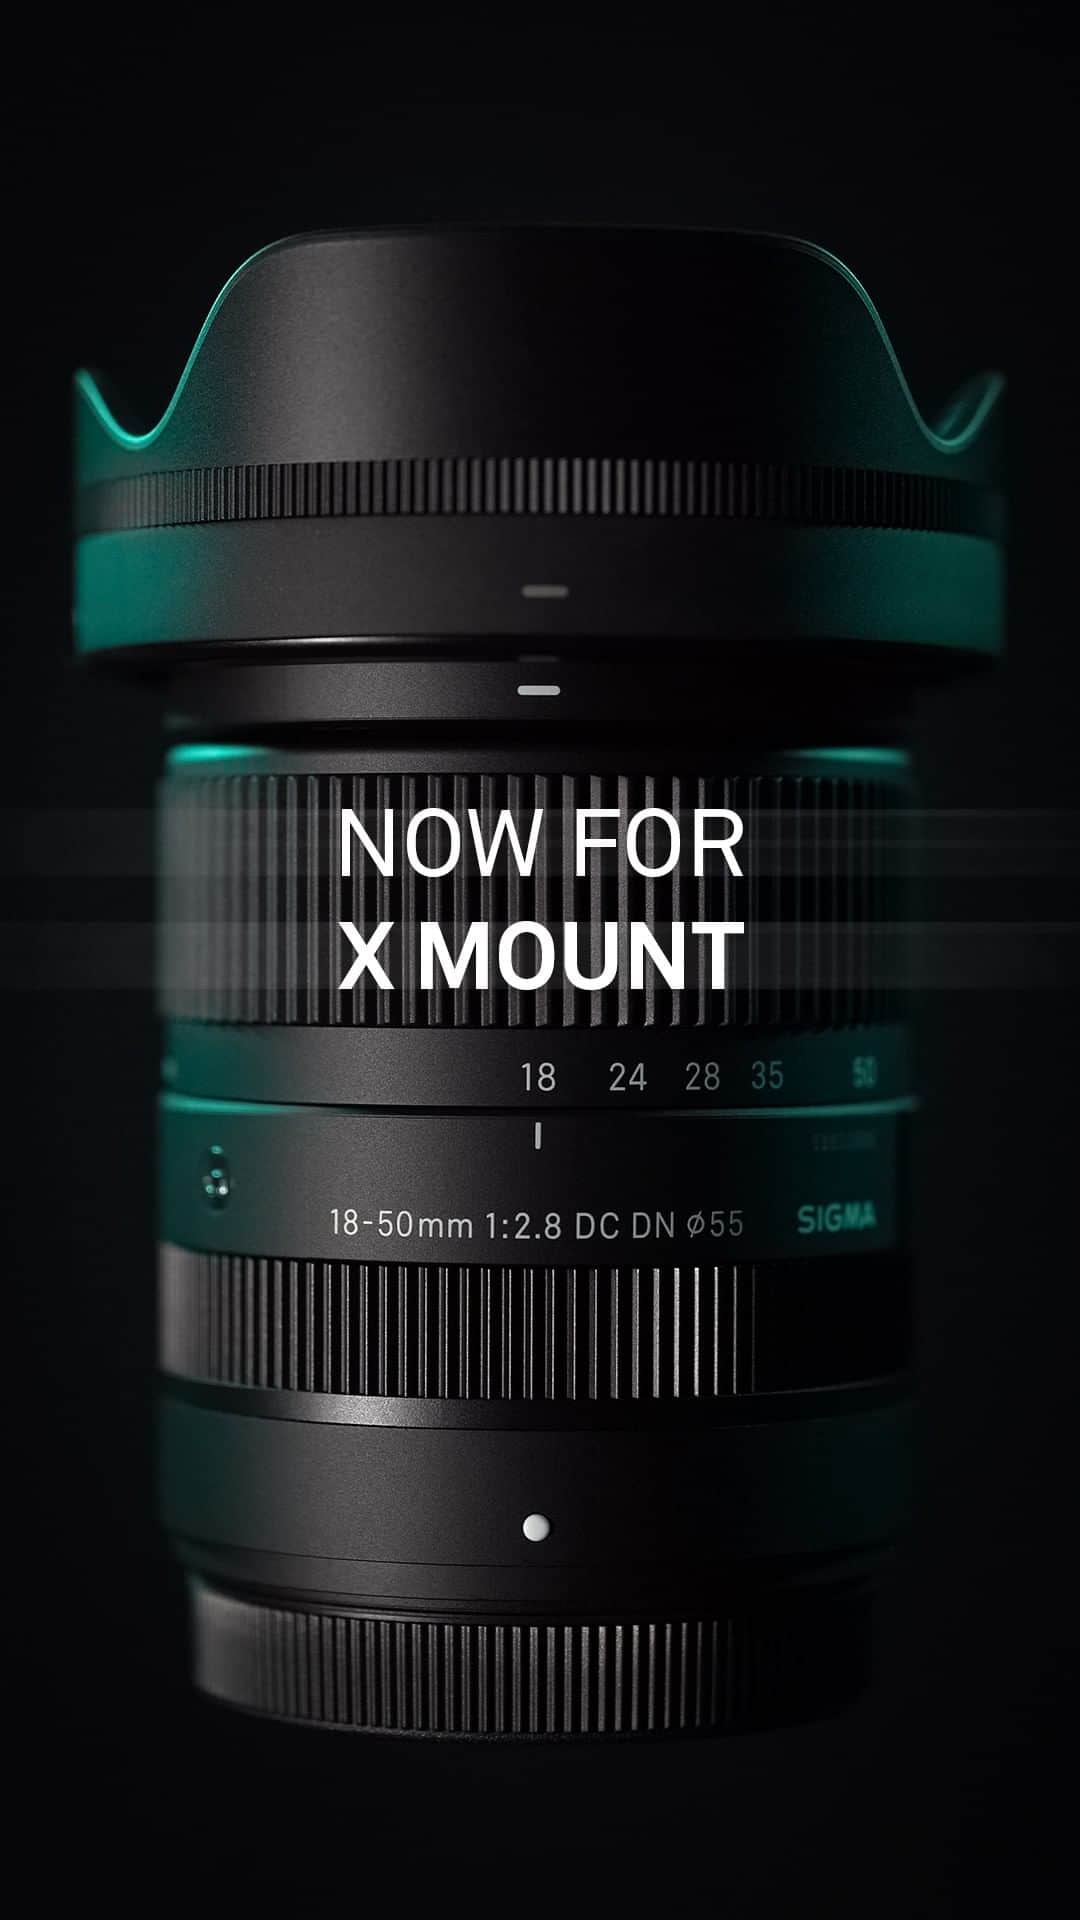 Sigma Corp Of America（シグマ）のインスタグラム：「🎉 COMING SOON! (early December) 🎉  SIGMA 18-50mm F2.8 DC DN | Contemporary for FUJIFILM X Mount 📷  The SIGMA 18-50mm F2.8 DC DN | Contemporary lens is the smallest and lightest F2.8 zoom for APS-C format mirrorless cameras, and it's coming soon (early December 2022) for FUJIFILM X Mount!   This incredibly compact lens features a full-frame equivalent 27-75mm focal range and a fast maximum aperture, offering both versatility and low-light performance.  Around 3 inches (76.8mm) long and weighing just over 10 ounces (285g), this lens is designed for users who want a compact, large-aperture workhorse zoom that is ideal for everyday photography, travel, video creation, streaming and more. With excellent optical performance, precise autofocus and 1:2.8 macro capability (at 18mm), the 18-50mm F2.8 DC DN | Contemporary is a lens that delivers in virtually any situation.  ▶️ LINK IN BIO to learn more!  Or go to:  💻 bit.ly/sigma-18-50mm  #SIGMA #SIGMAXMount #SIGMA1850mmContemporary #sigmaphoto #photography #SIGMAContemporary #SIGMADCDN #sigmalens #sigmalenses #mirrorless #mirrorlessphotography #cropsensor #apsc #Lmount #Lmountalliance #Emount #zoomlens #reels #reelsinstagram」